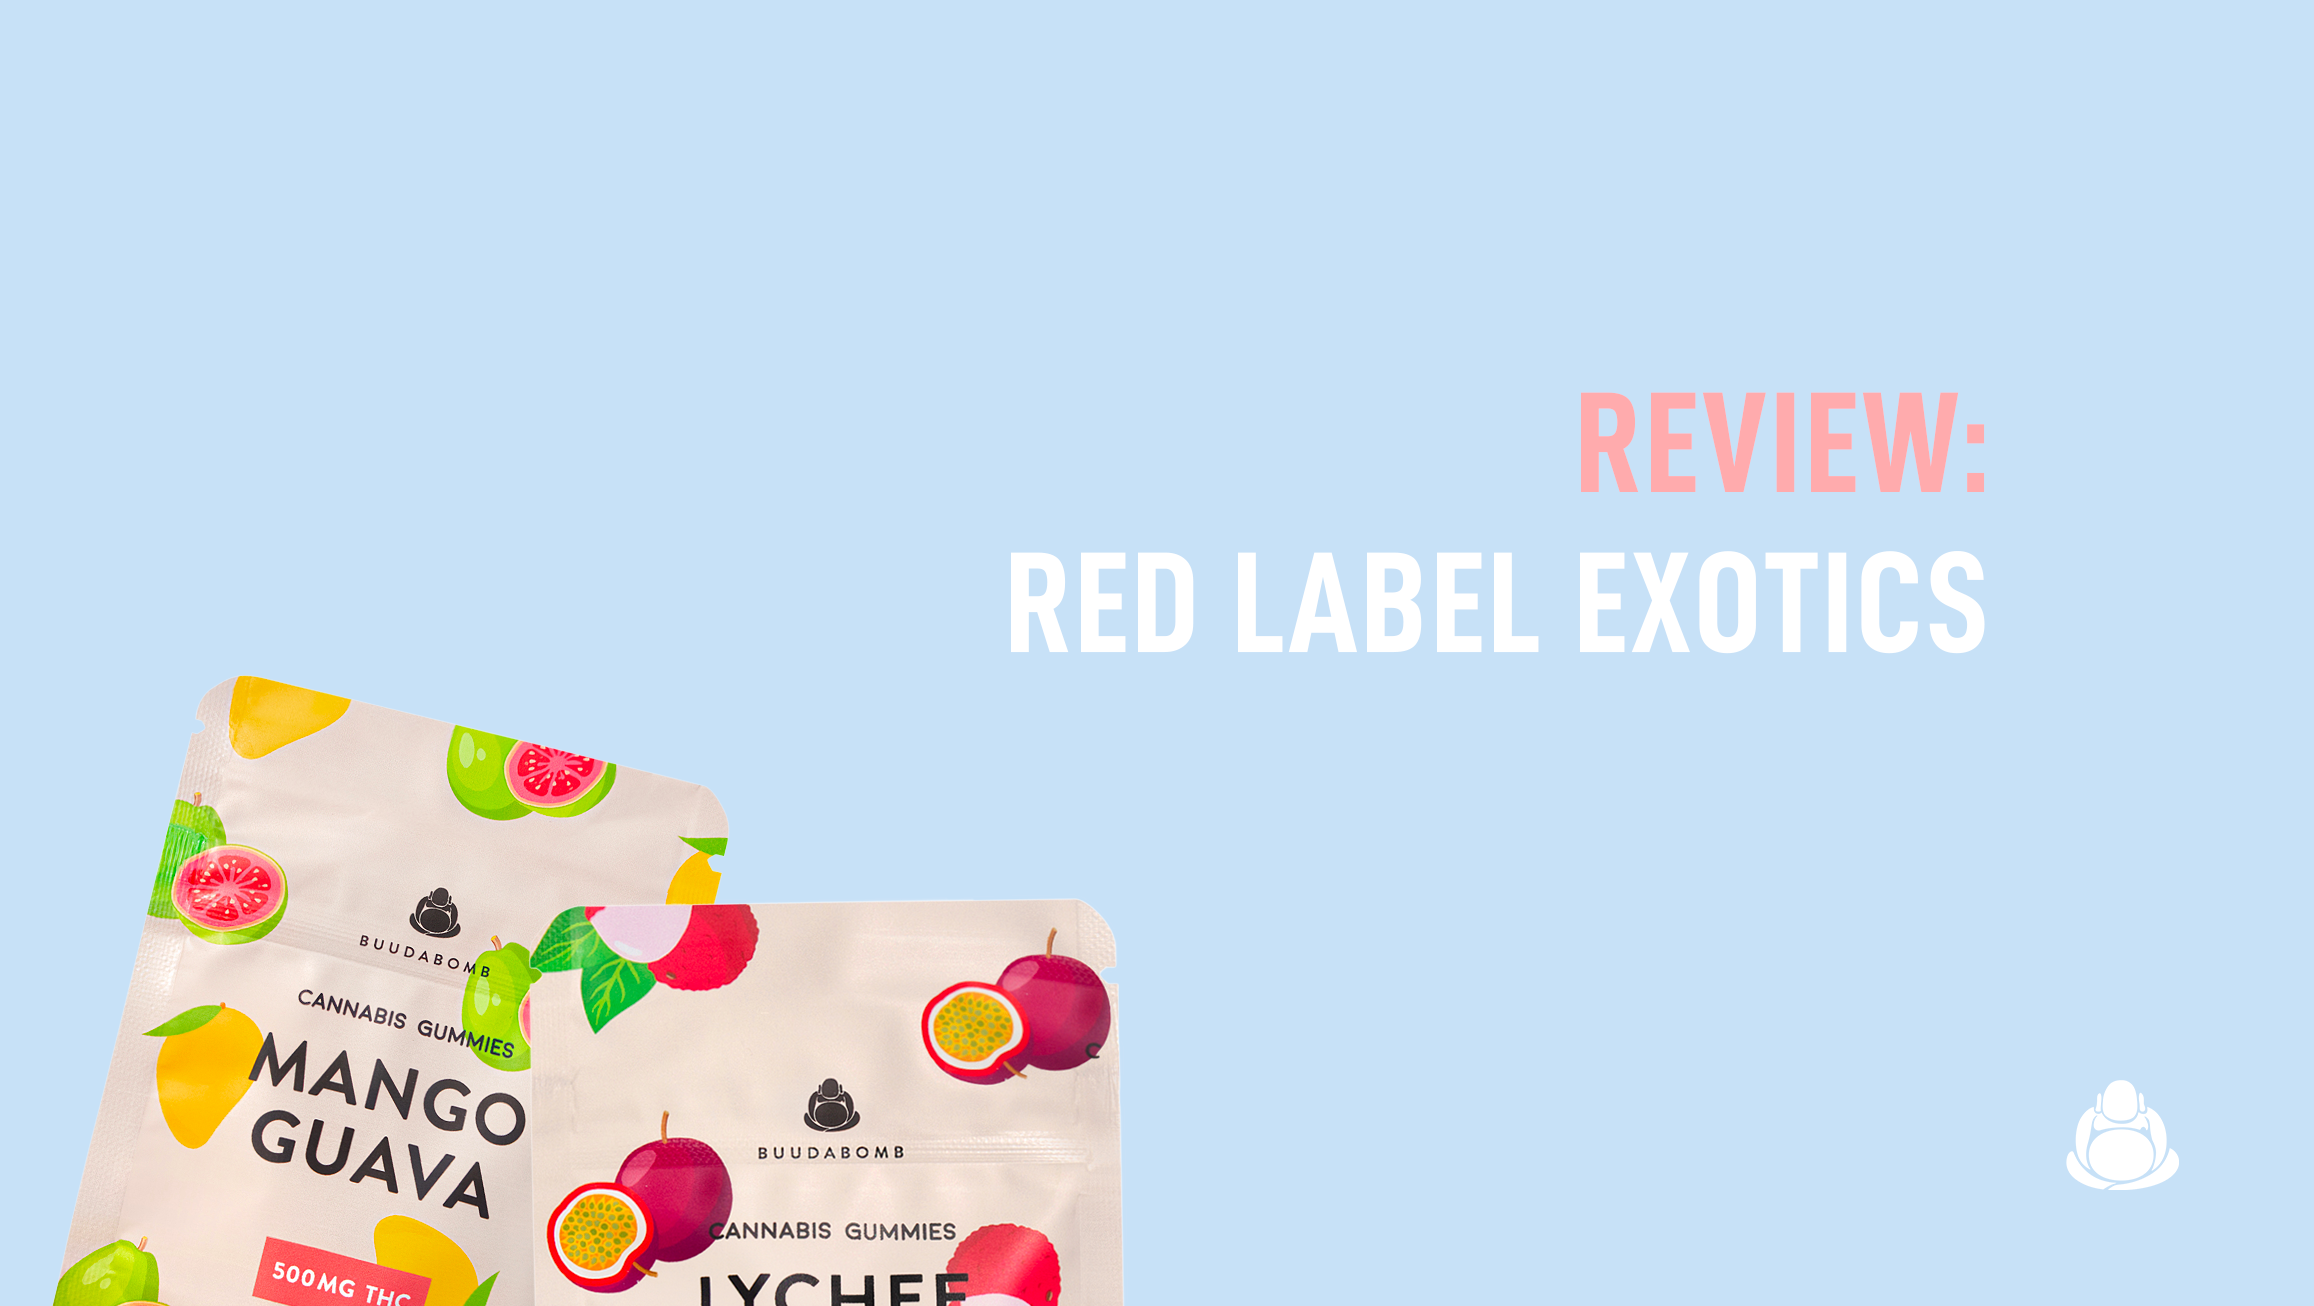 Product Review: Red Label Exotics